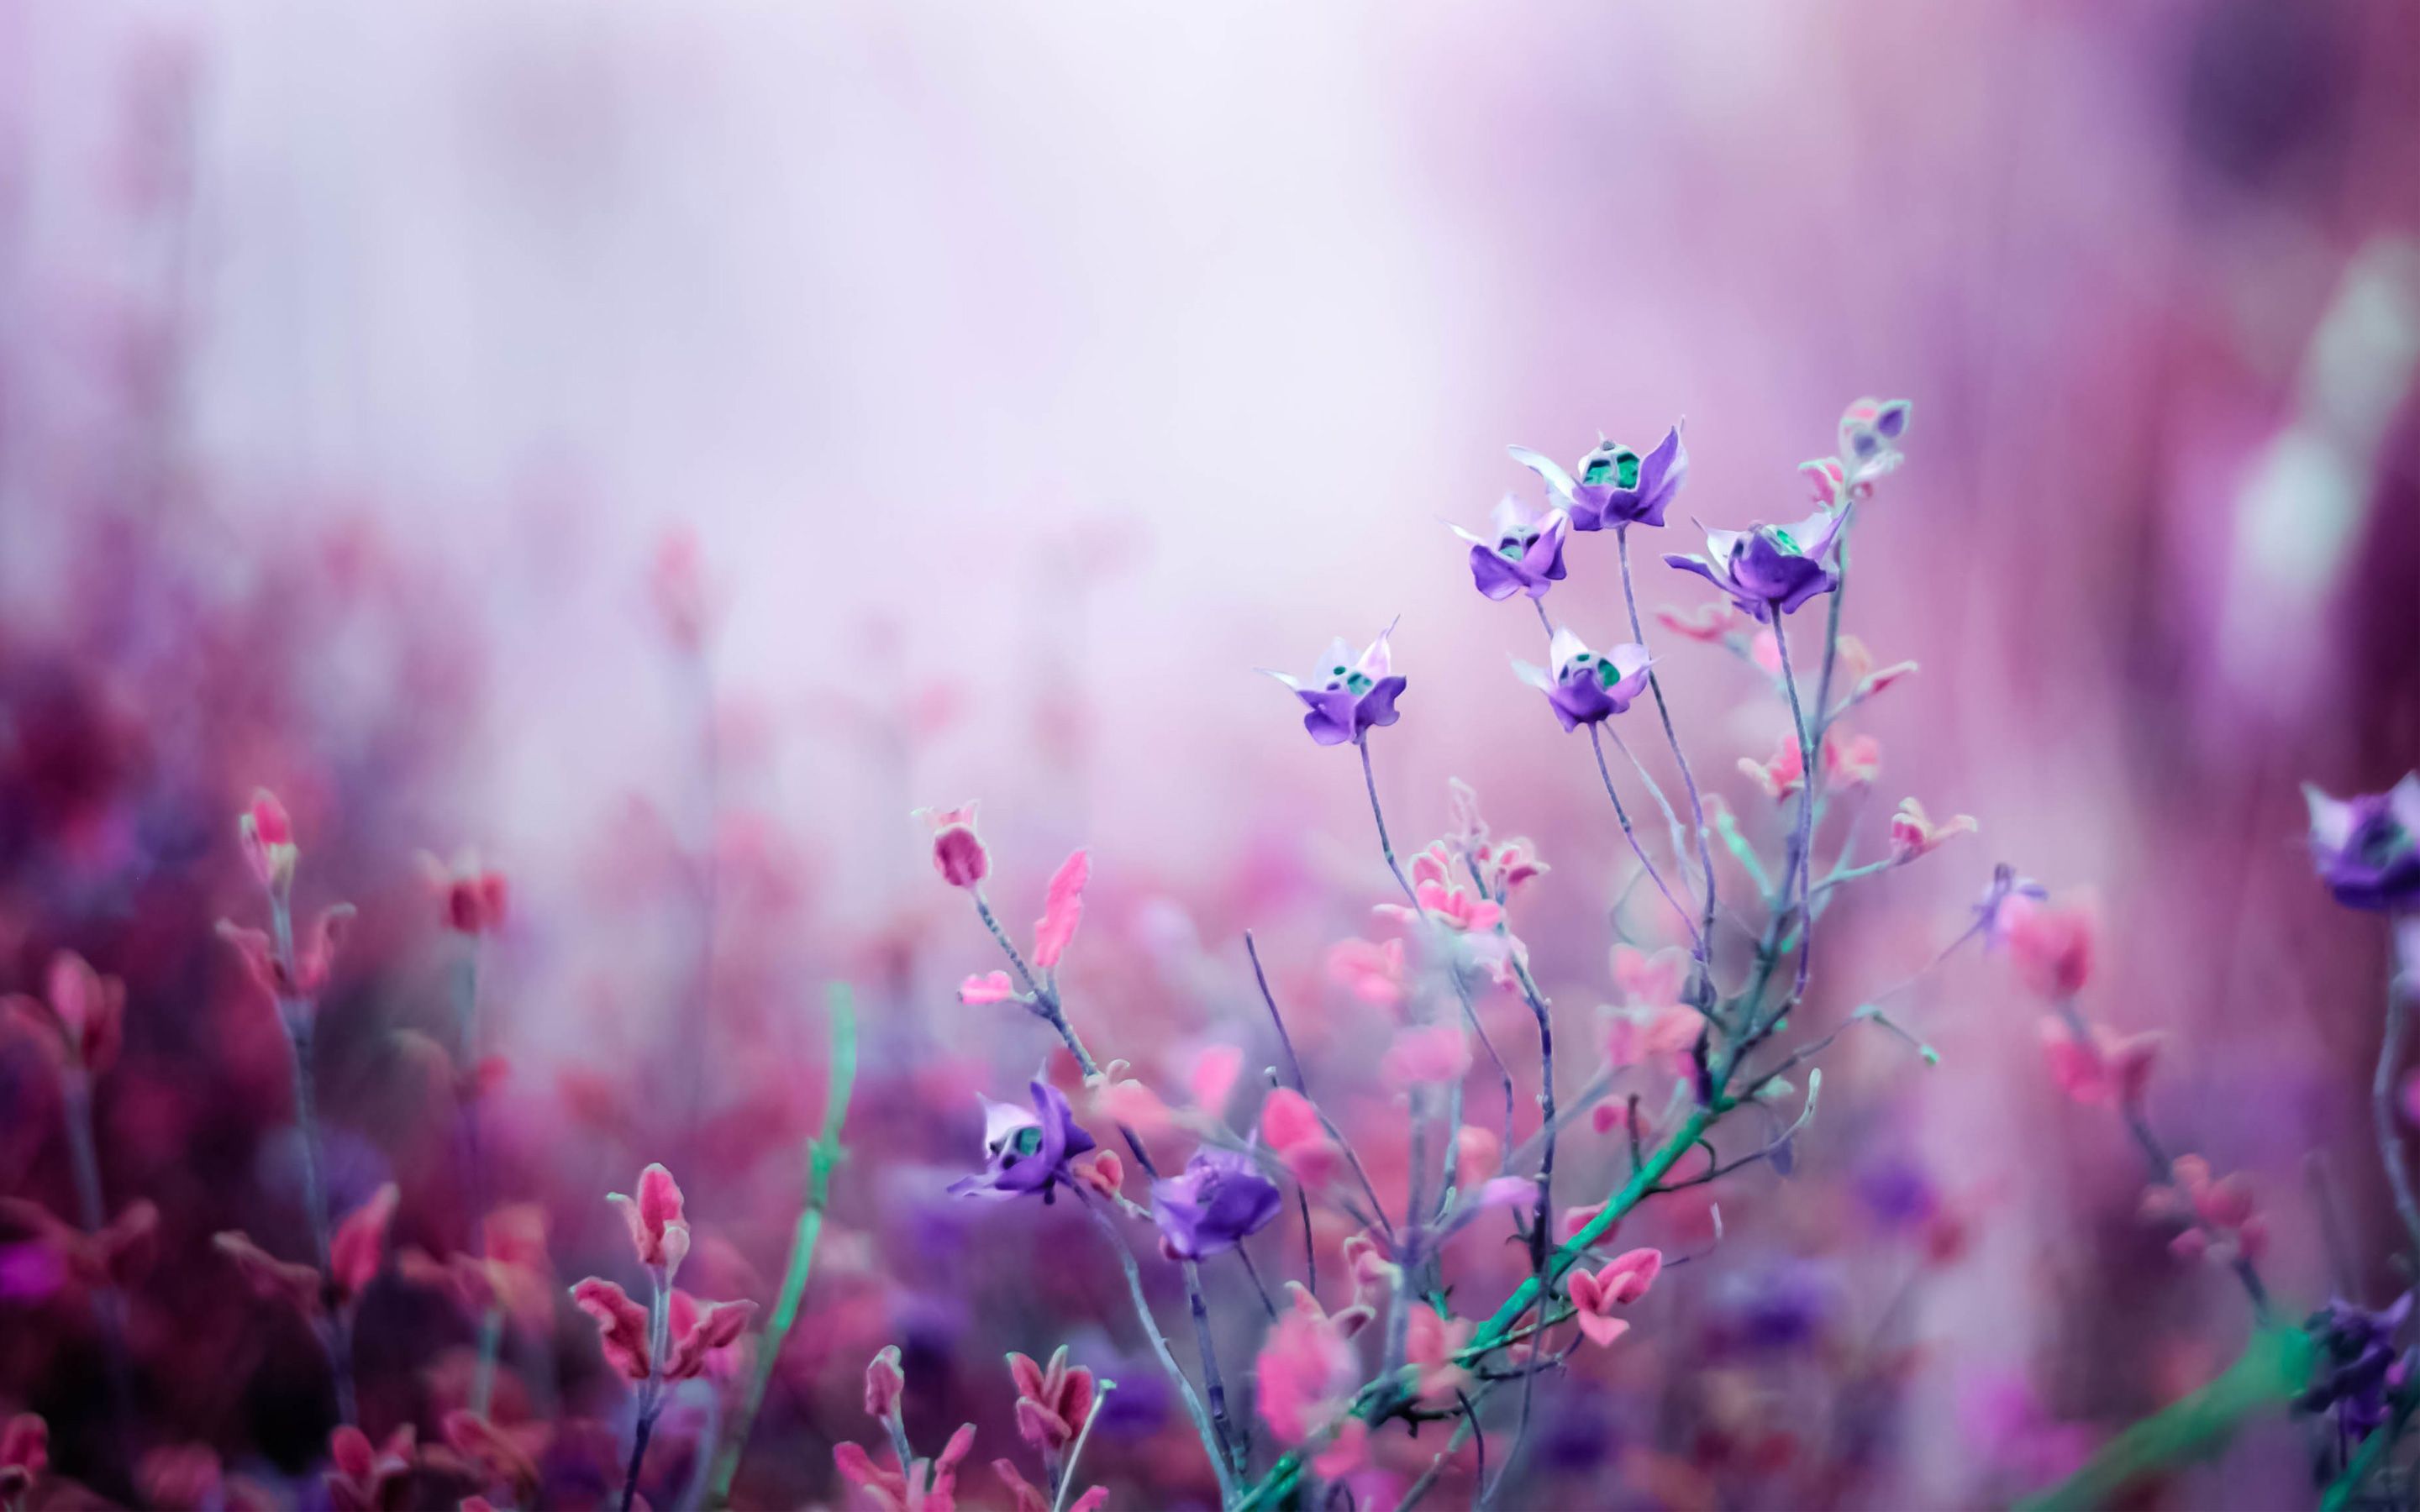 Beautiful flowers images wallpapers free download